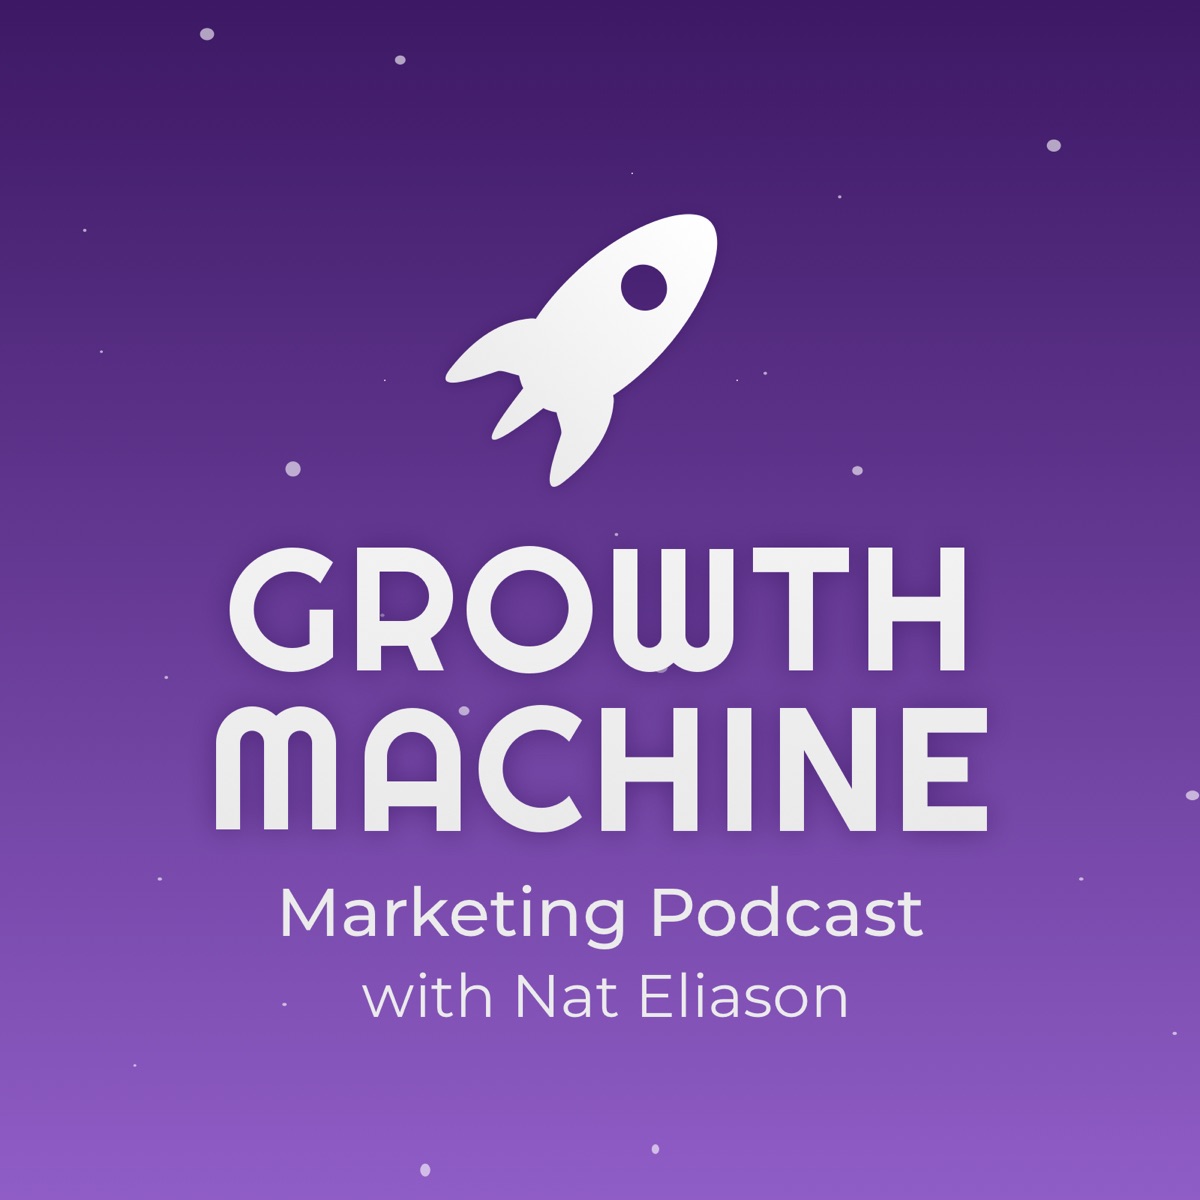 image of a space rocket with the following overlay text: "Growth machine, Marketing podcats with Nat Eliason".